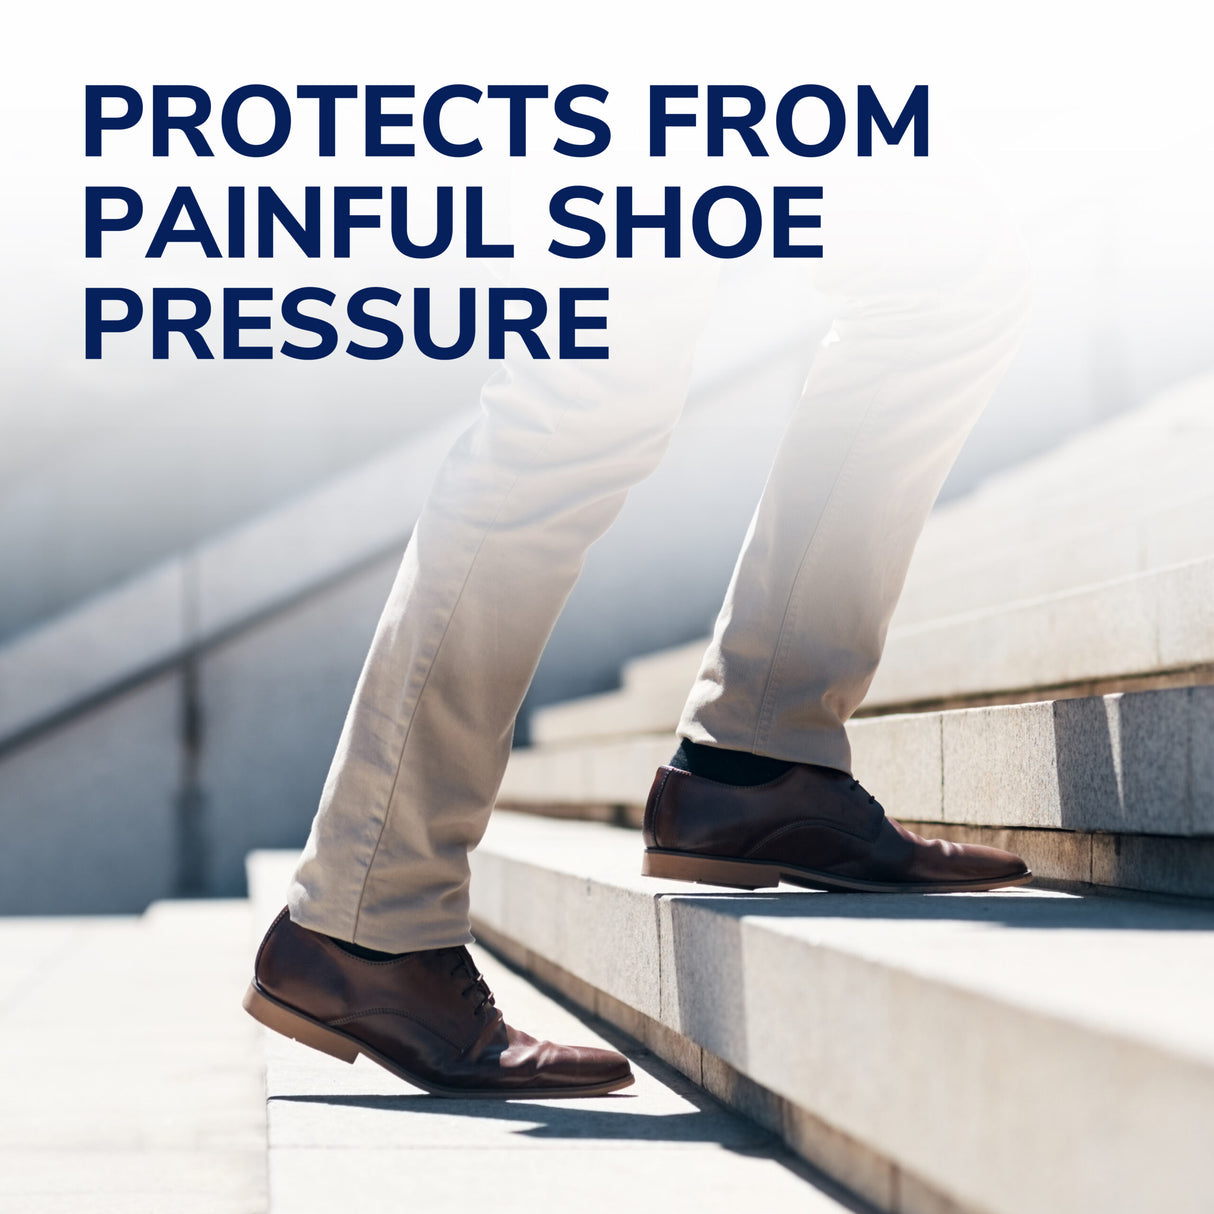 image of protects from painful shoe pressure